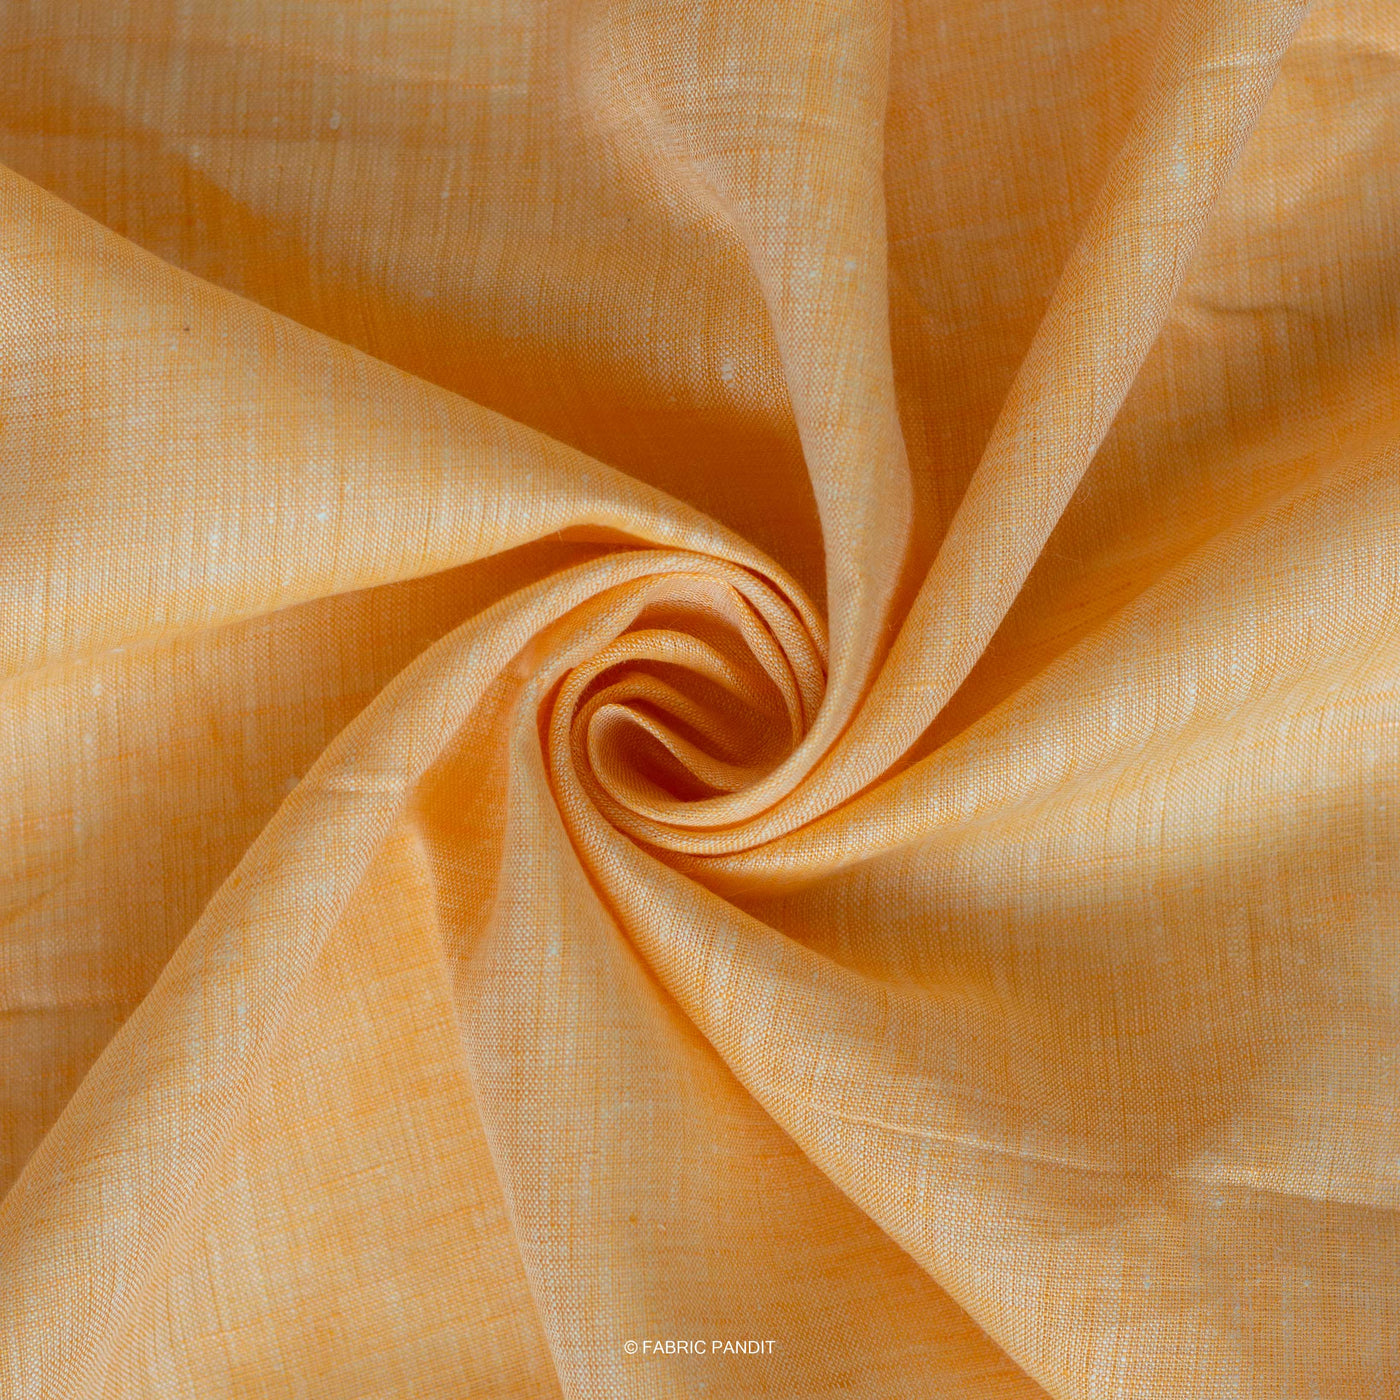 Fabric Pandit Cut Piece 0.25M (CUT PIECE) Amber Yellow Color Plain Yarn Dyed 60 Lea Pure Linen Fabric (58 Inches)